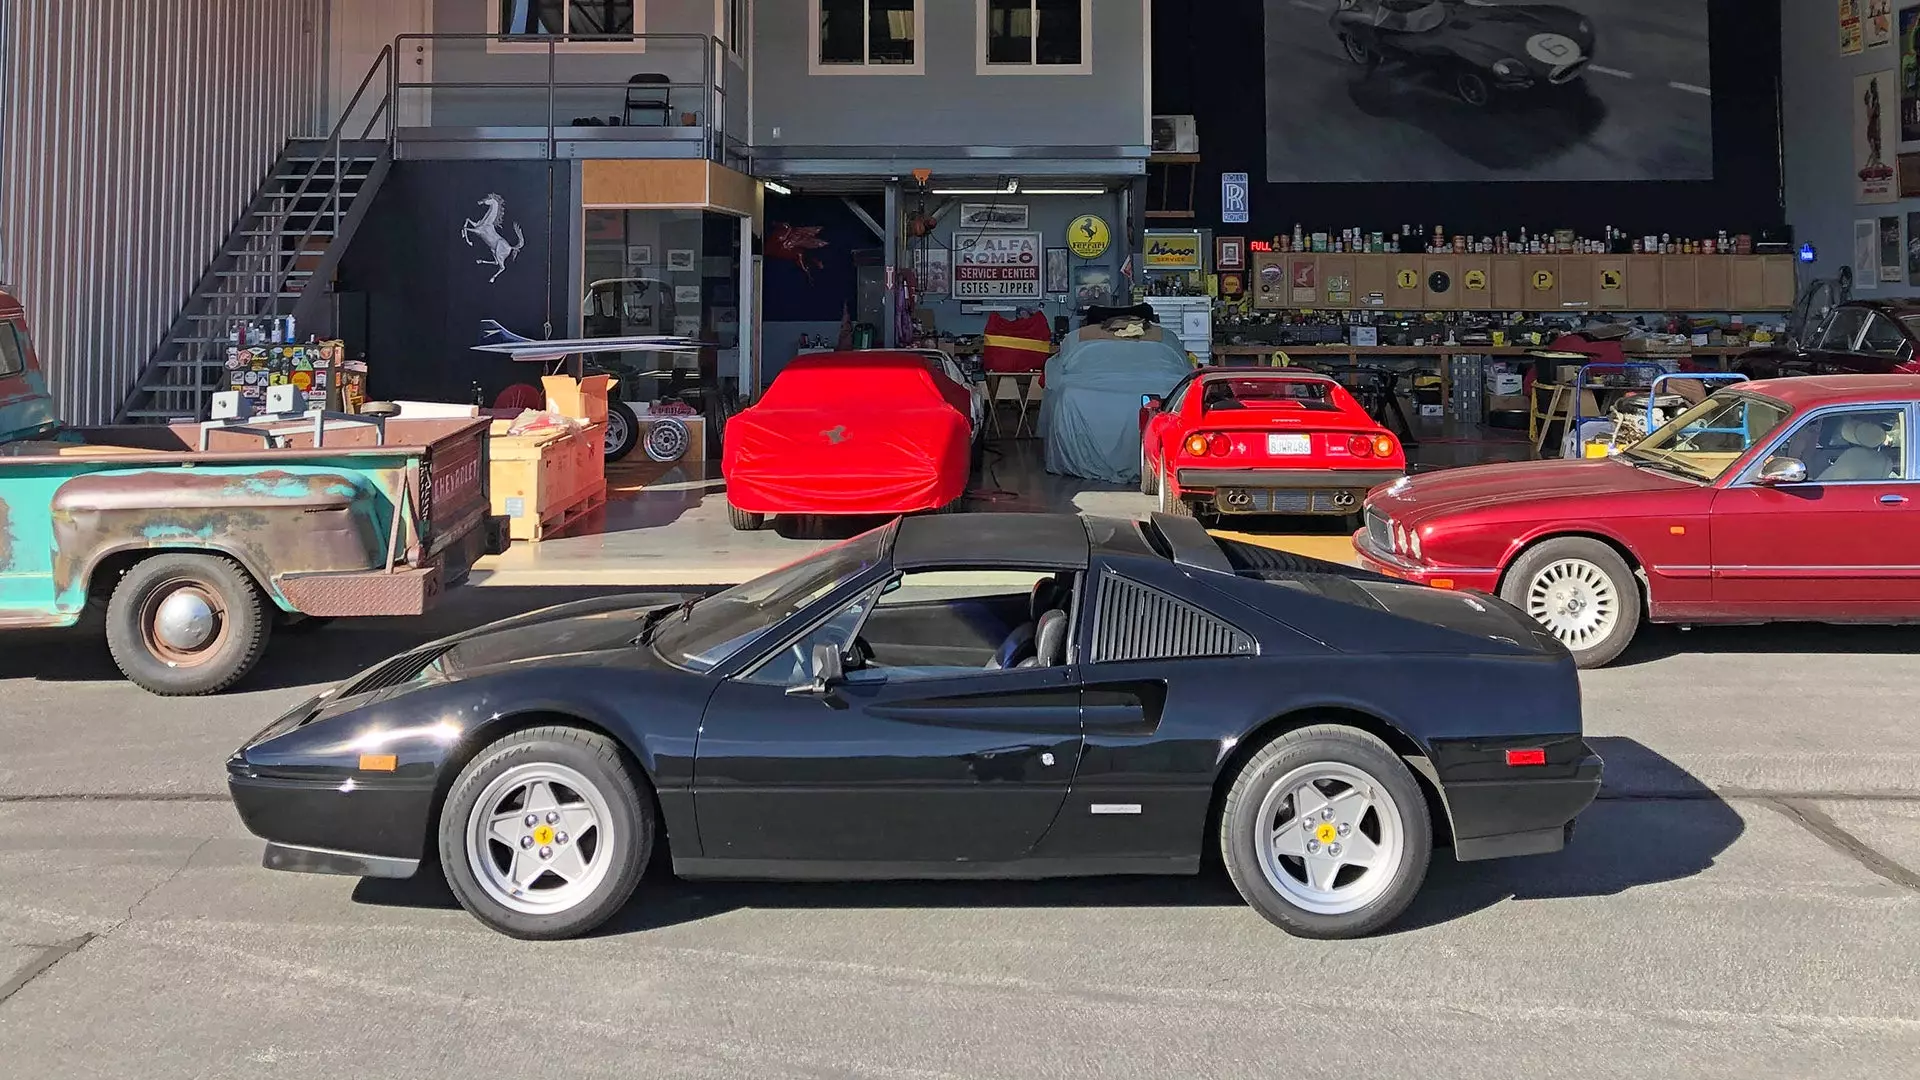 Not Taking My Own Advice on a Vintage Ferrari Cost Me $10,000 | Autance